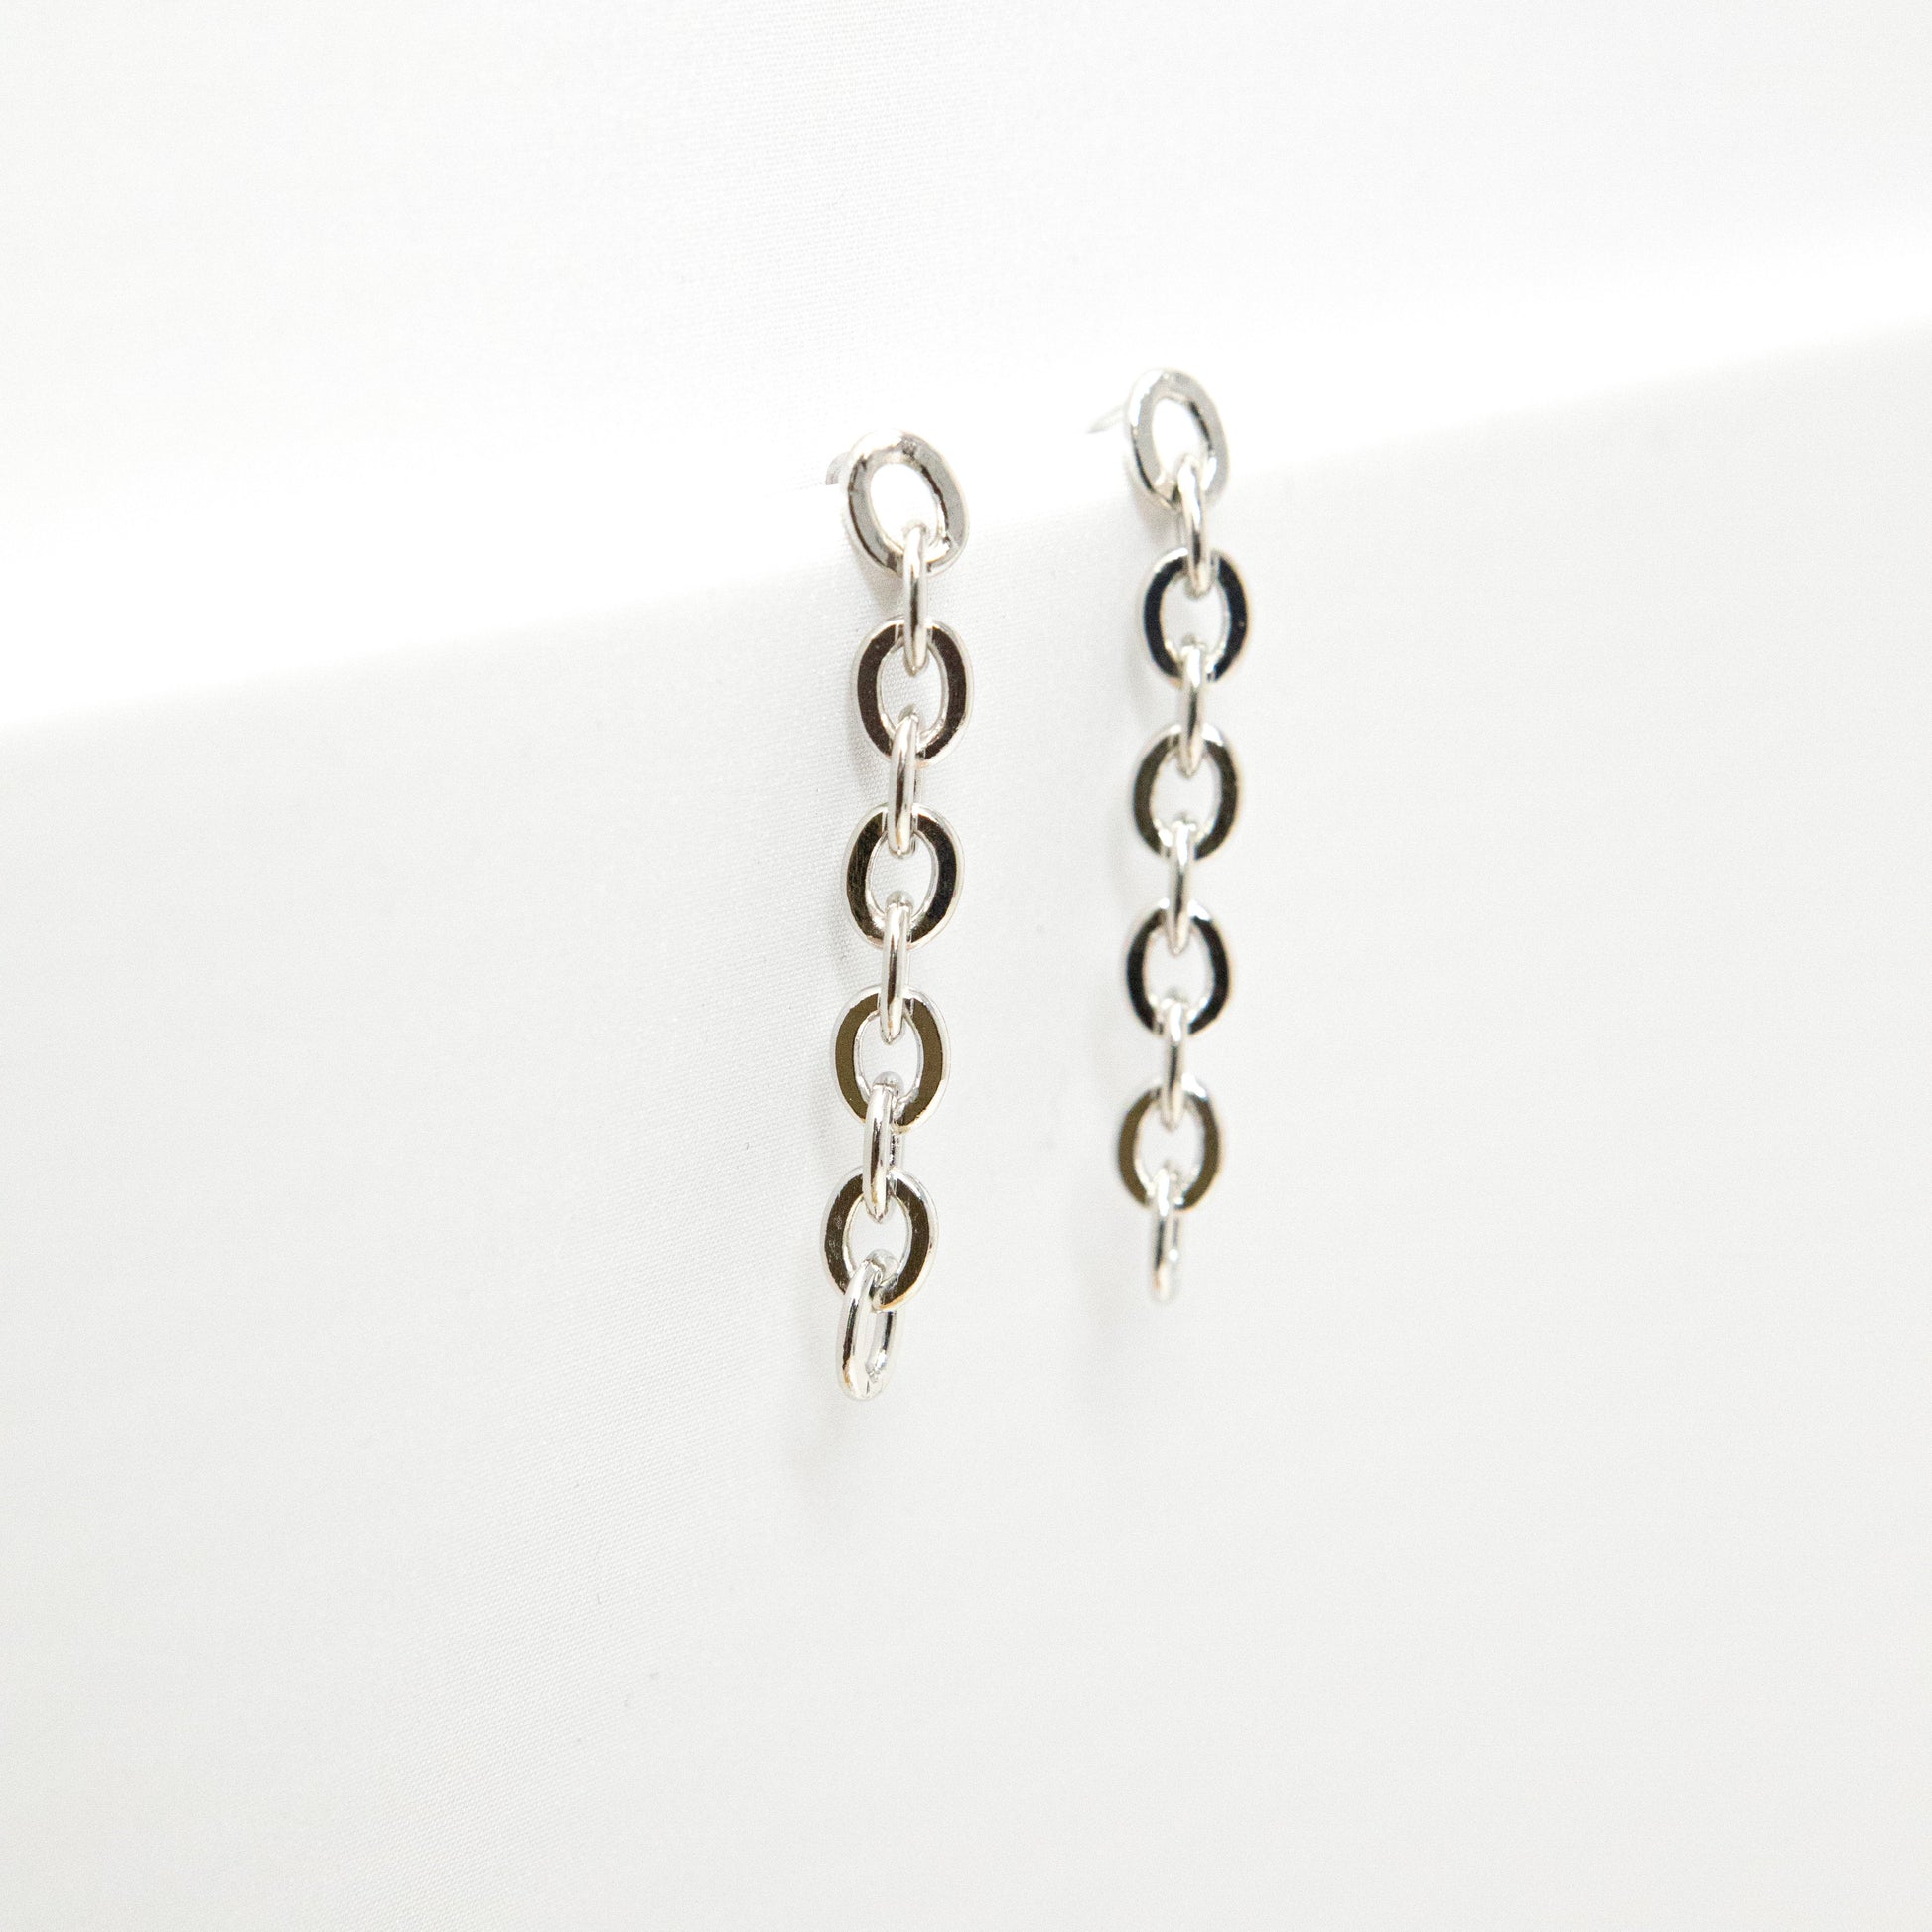 Chain Link Drop Earrings JEWELRY The Sis Kiss Oval Silver